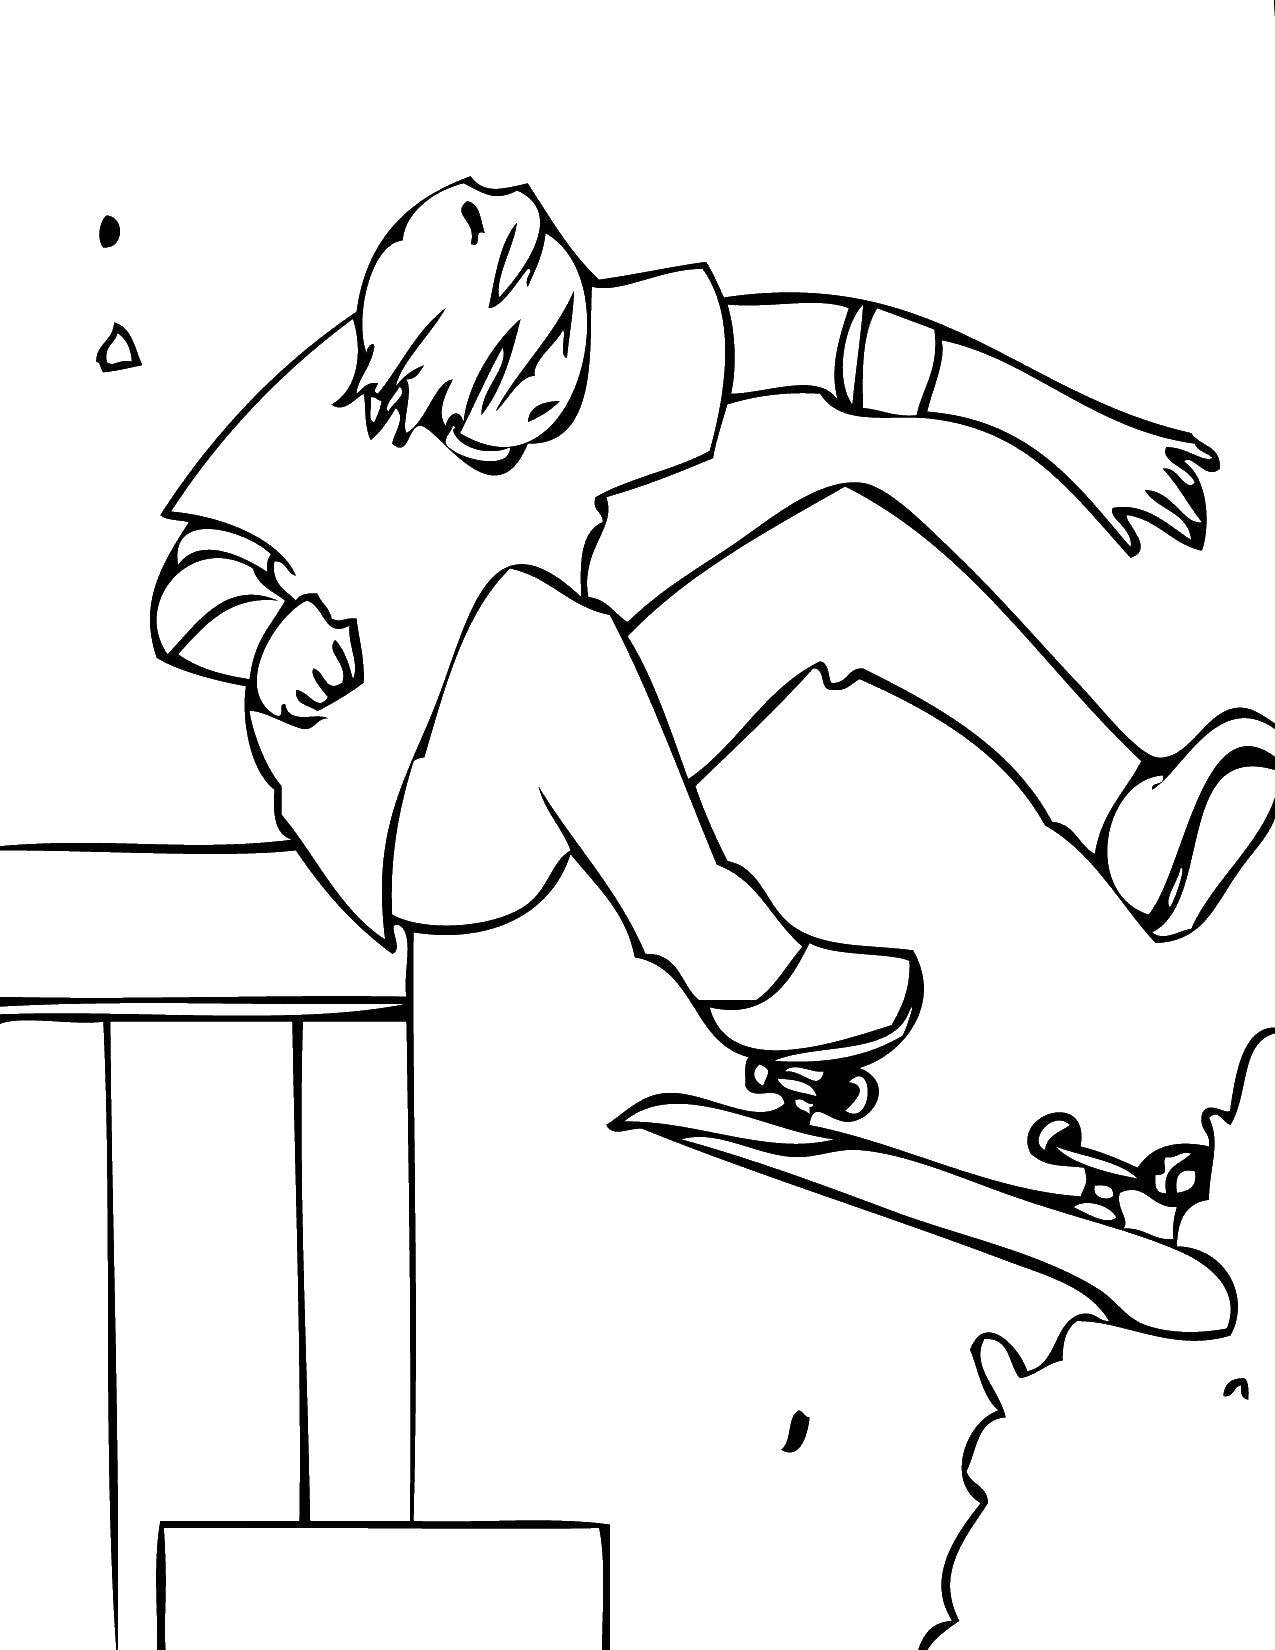 Coloring Skateboarding. Category Sports. Tags:  sports, skateboard, skateboarder, boy.